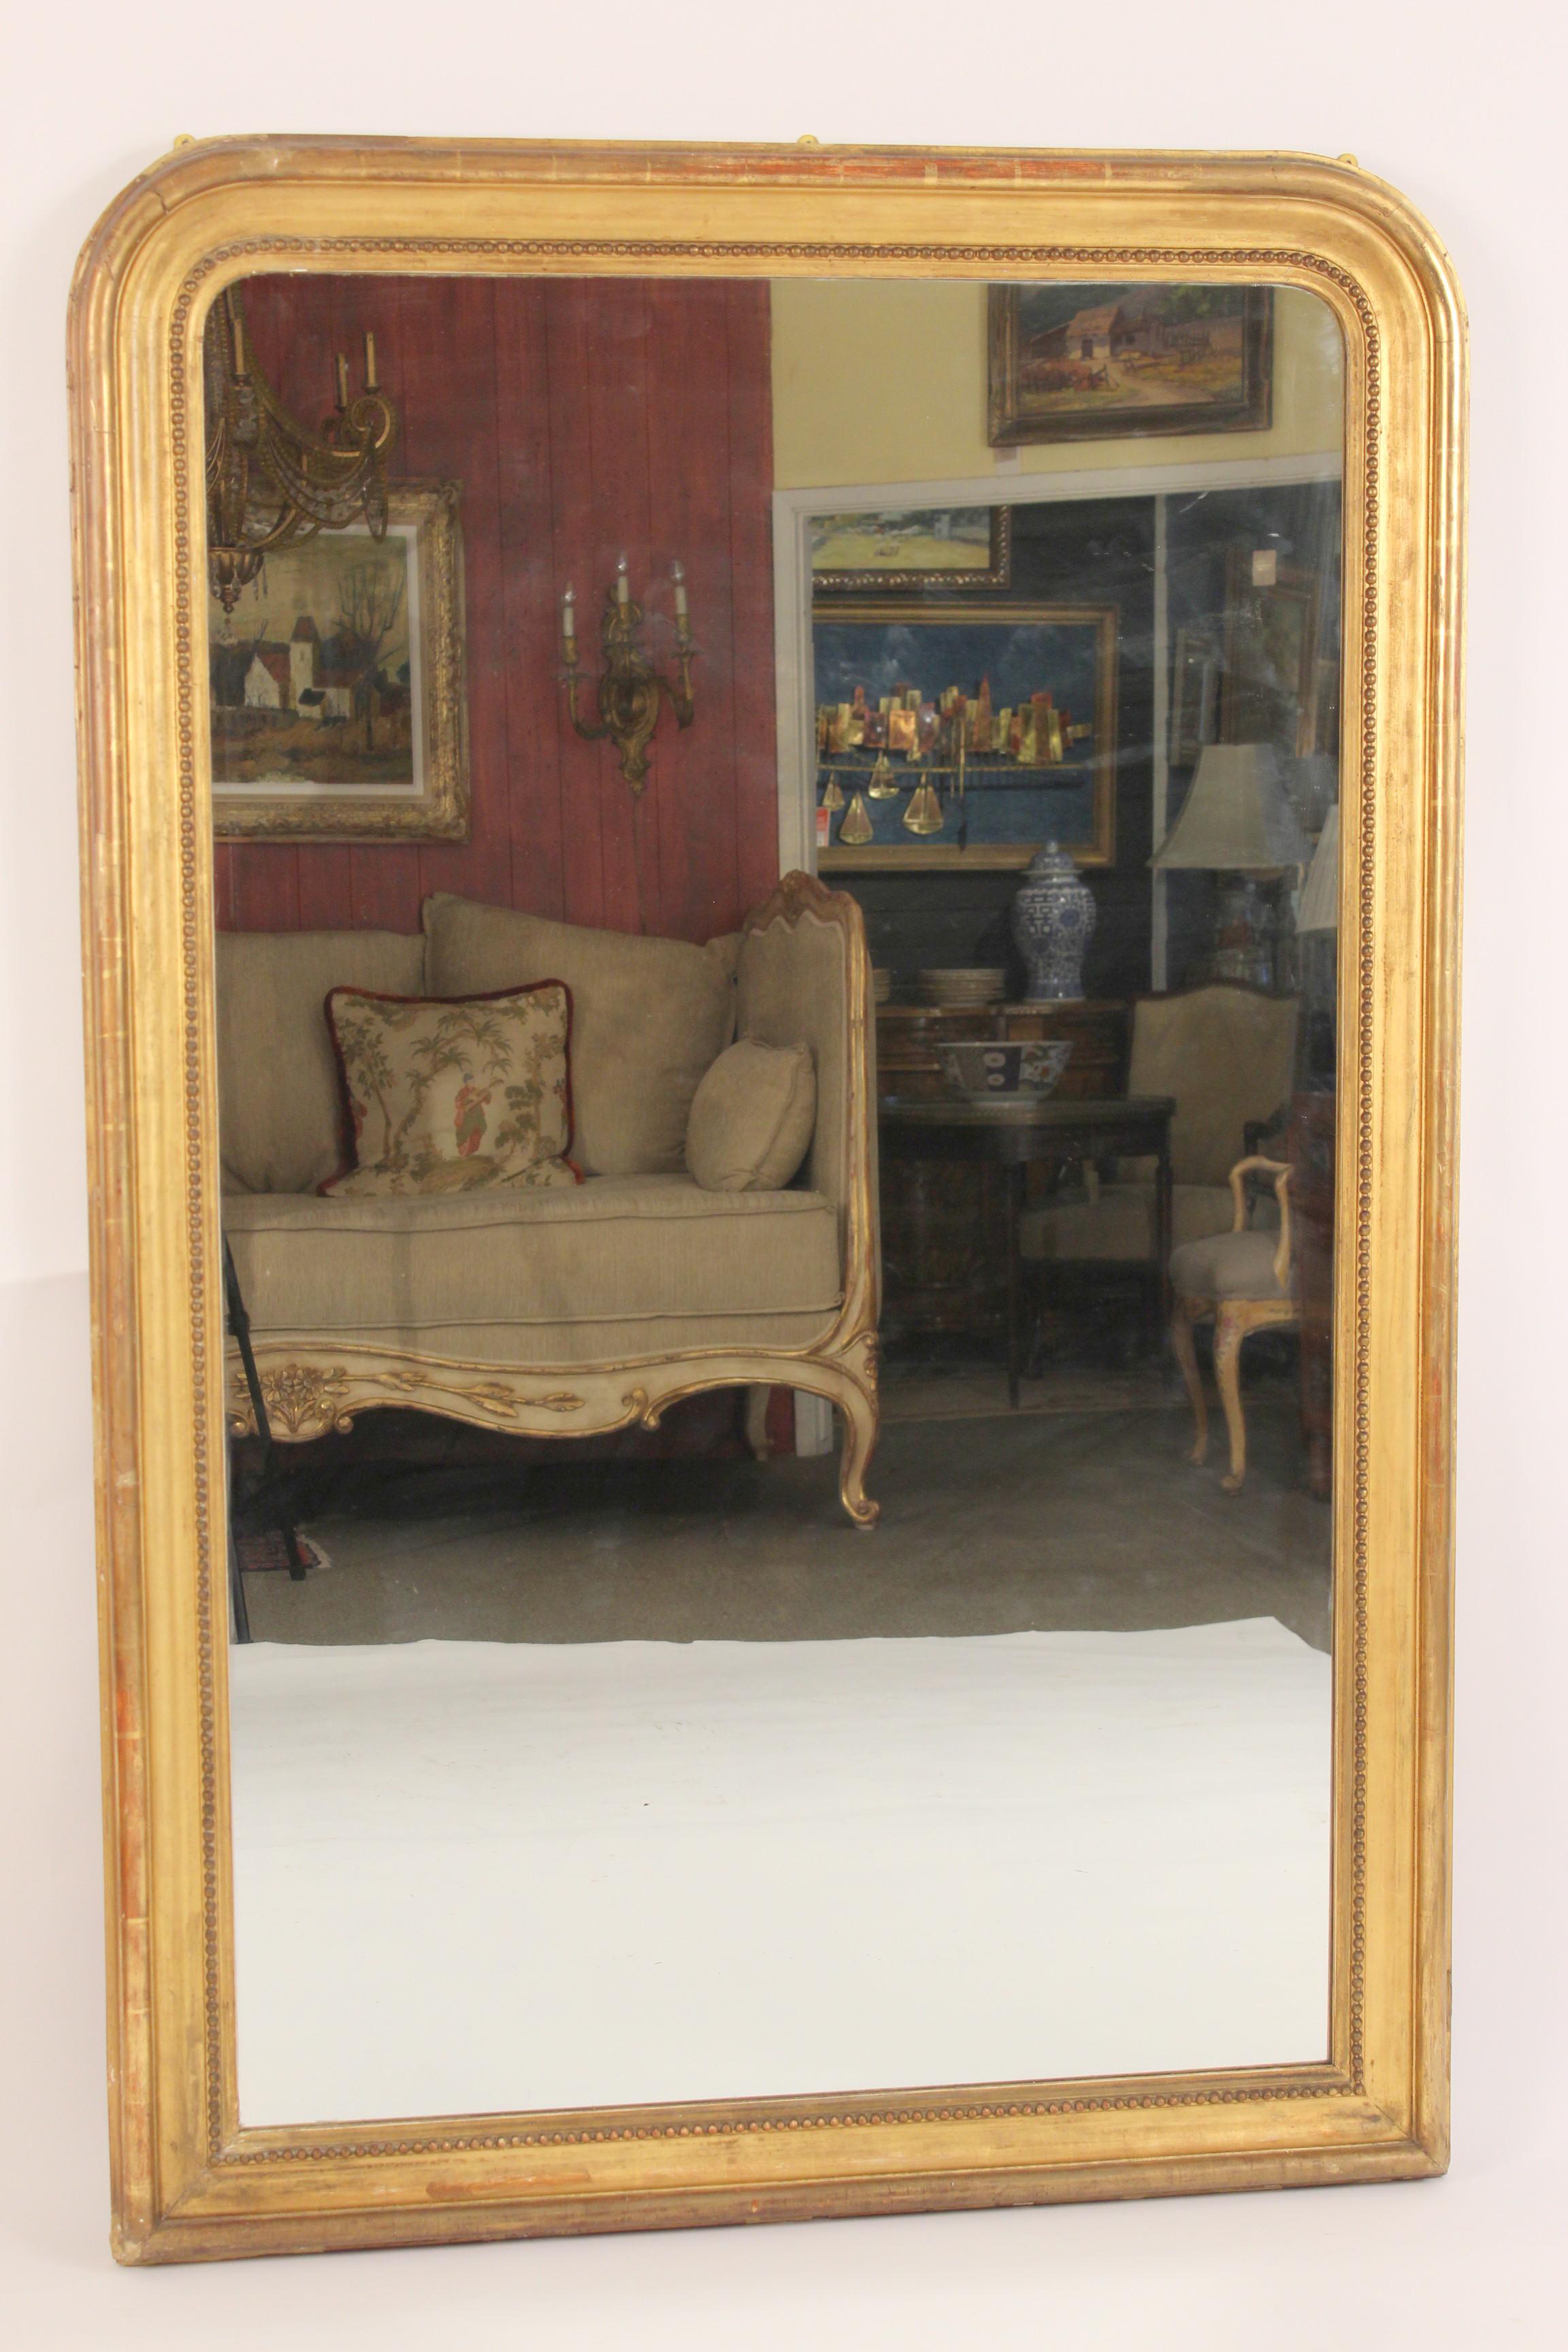 Antique Louis Philippe style giltwood mirror, late 19th century.